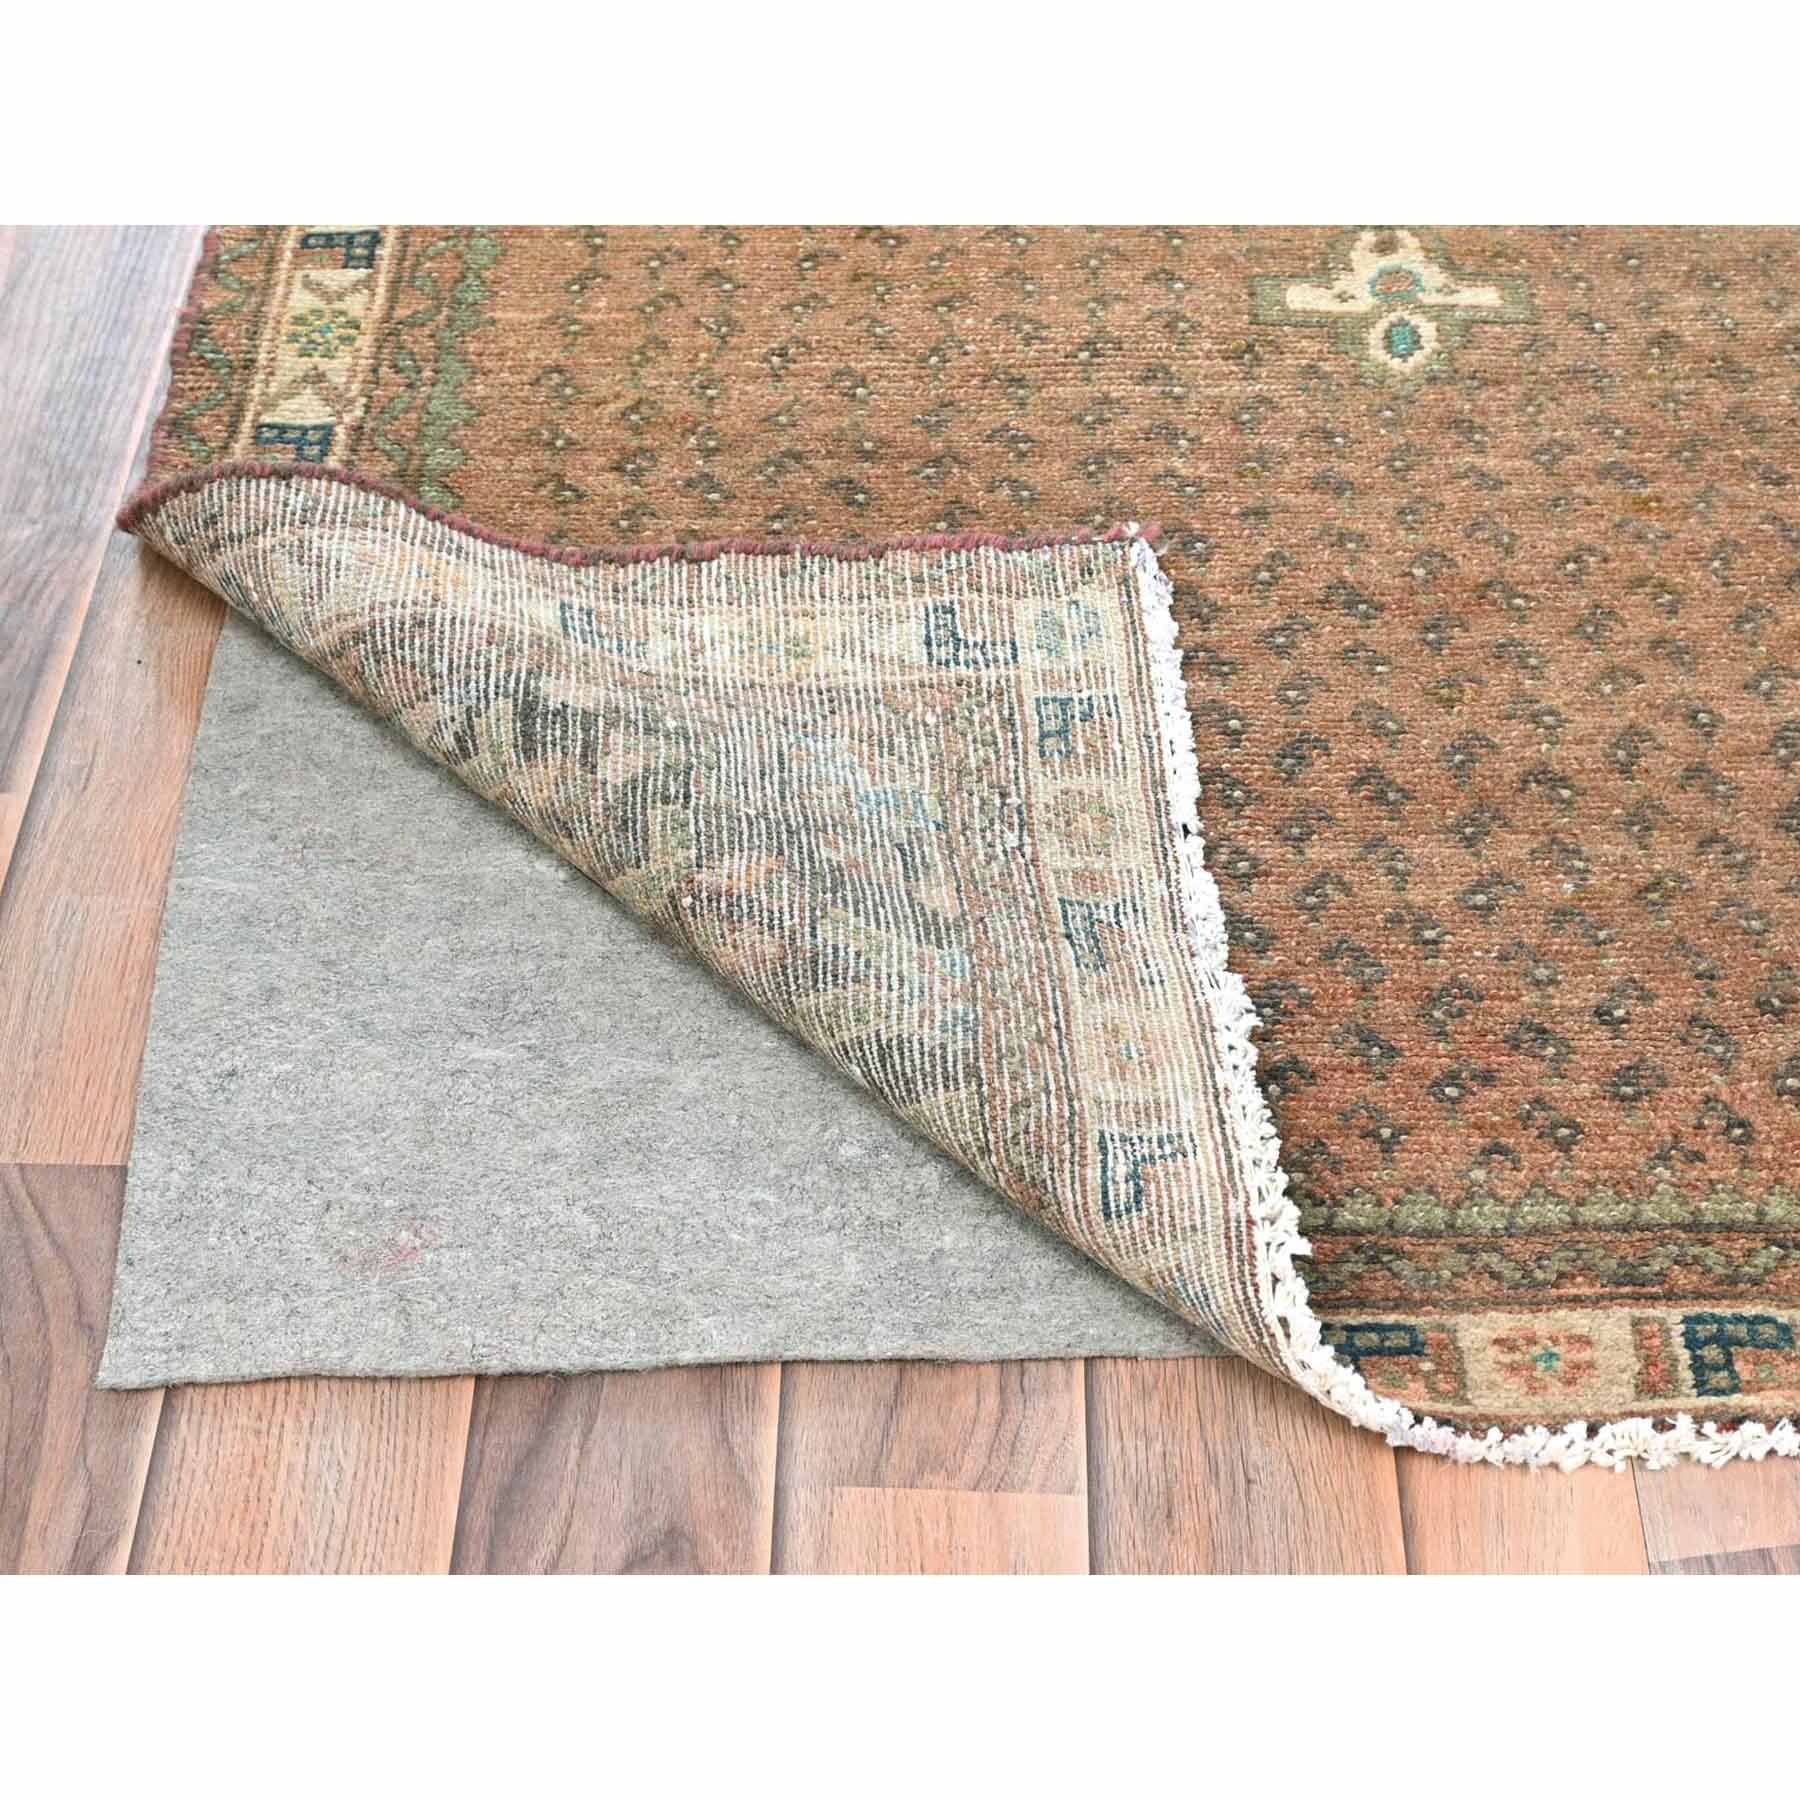 Overdyed-Vintage-Hand-Knotted-Rug-409620